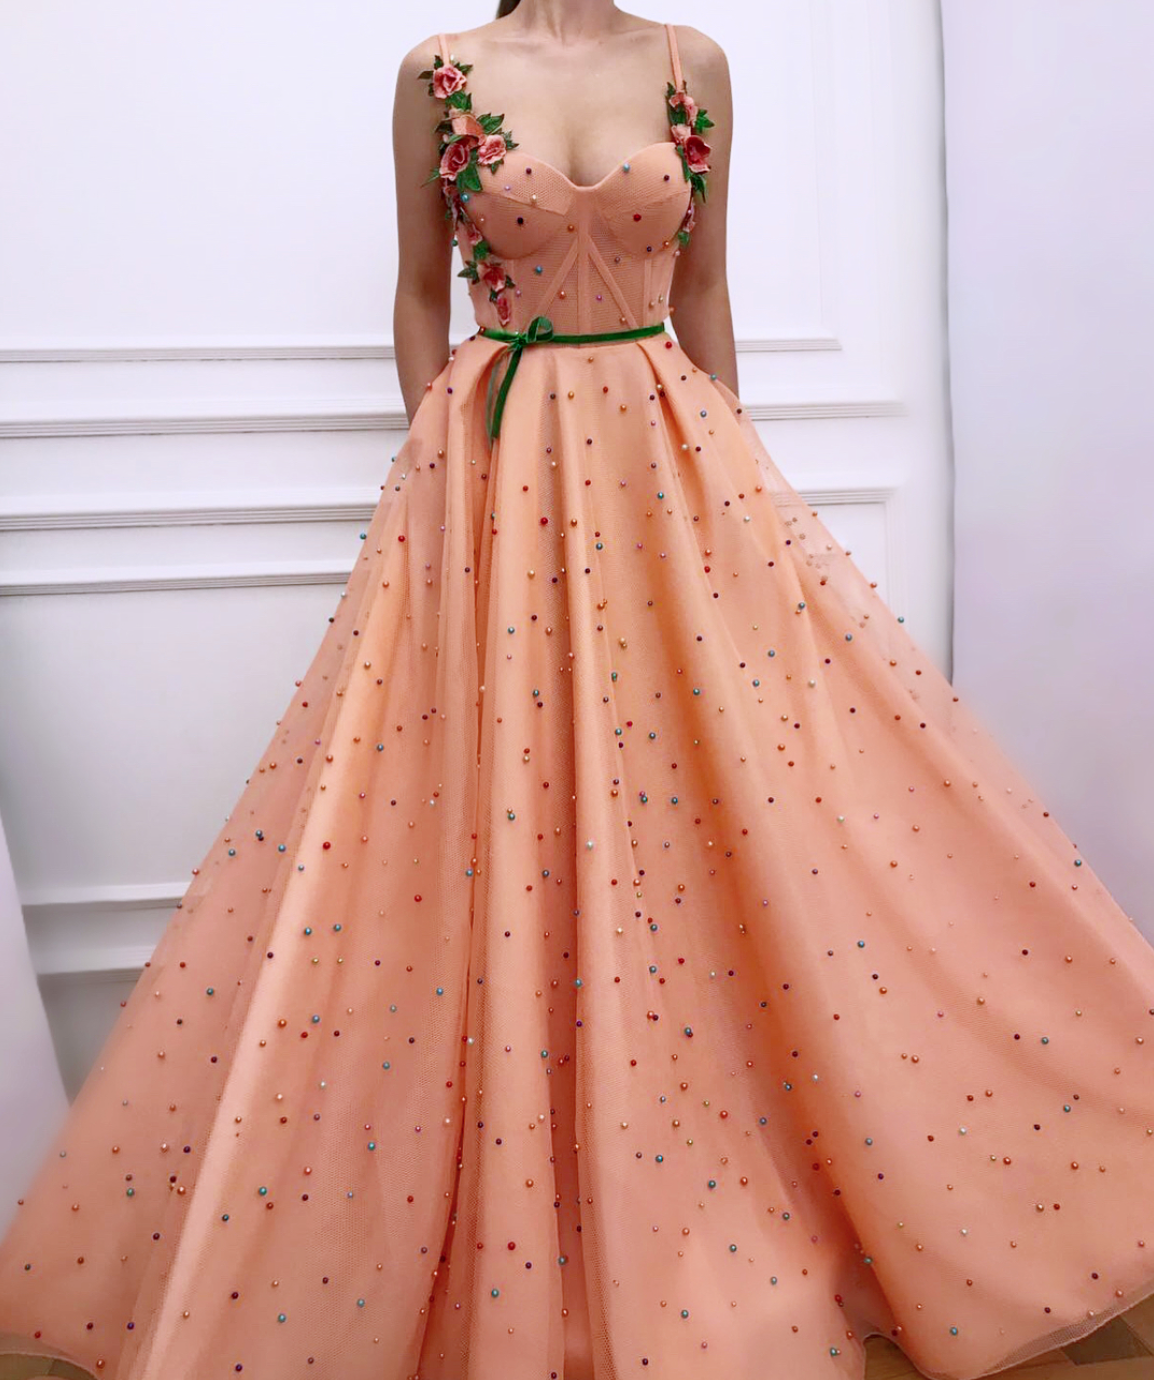 Peach A-Line dress with beading, spaghetti straps and embroidery